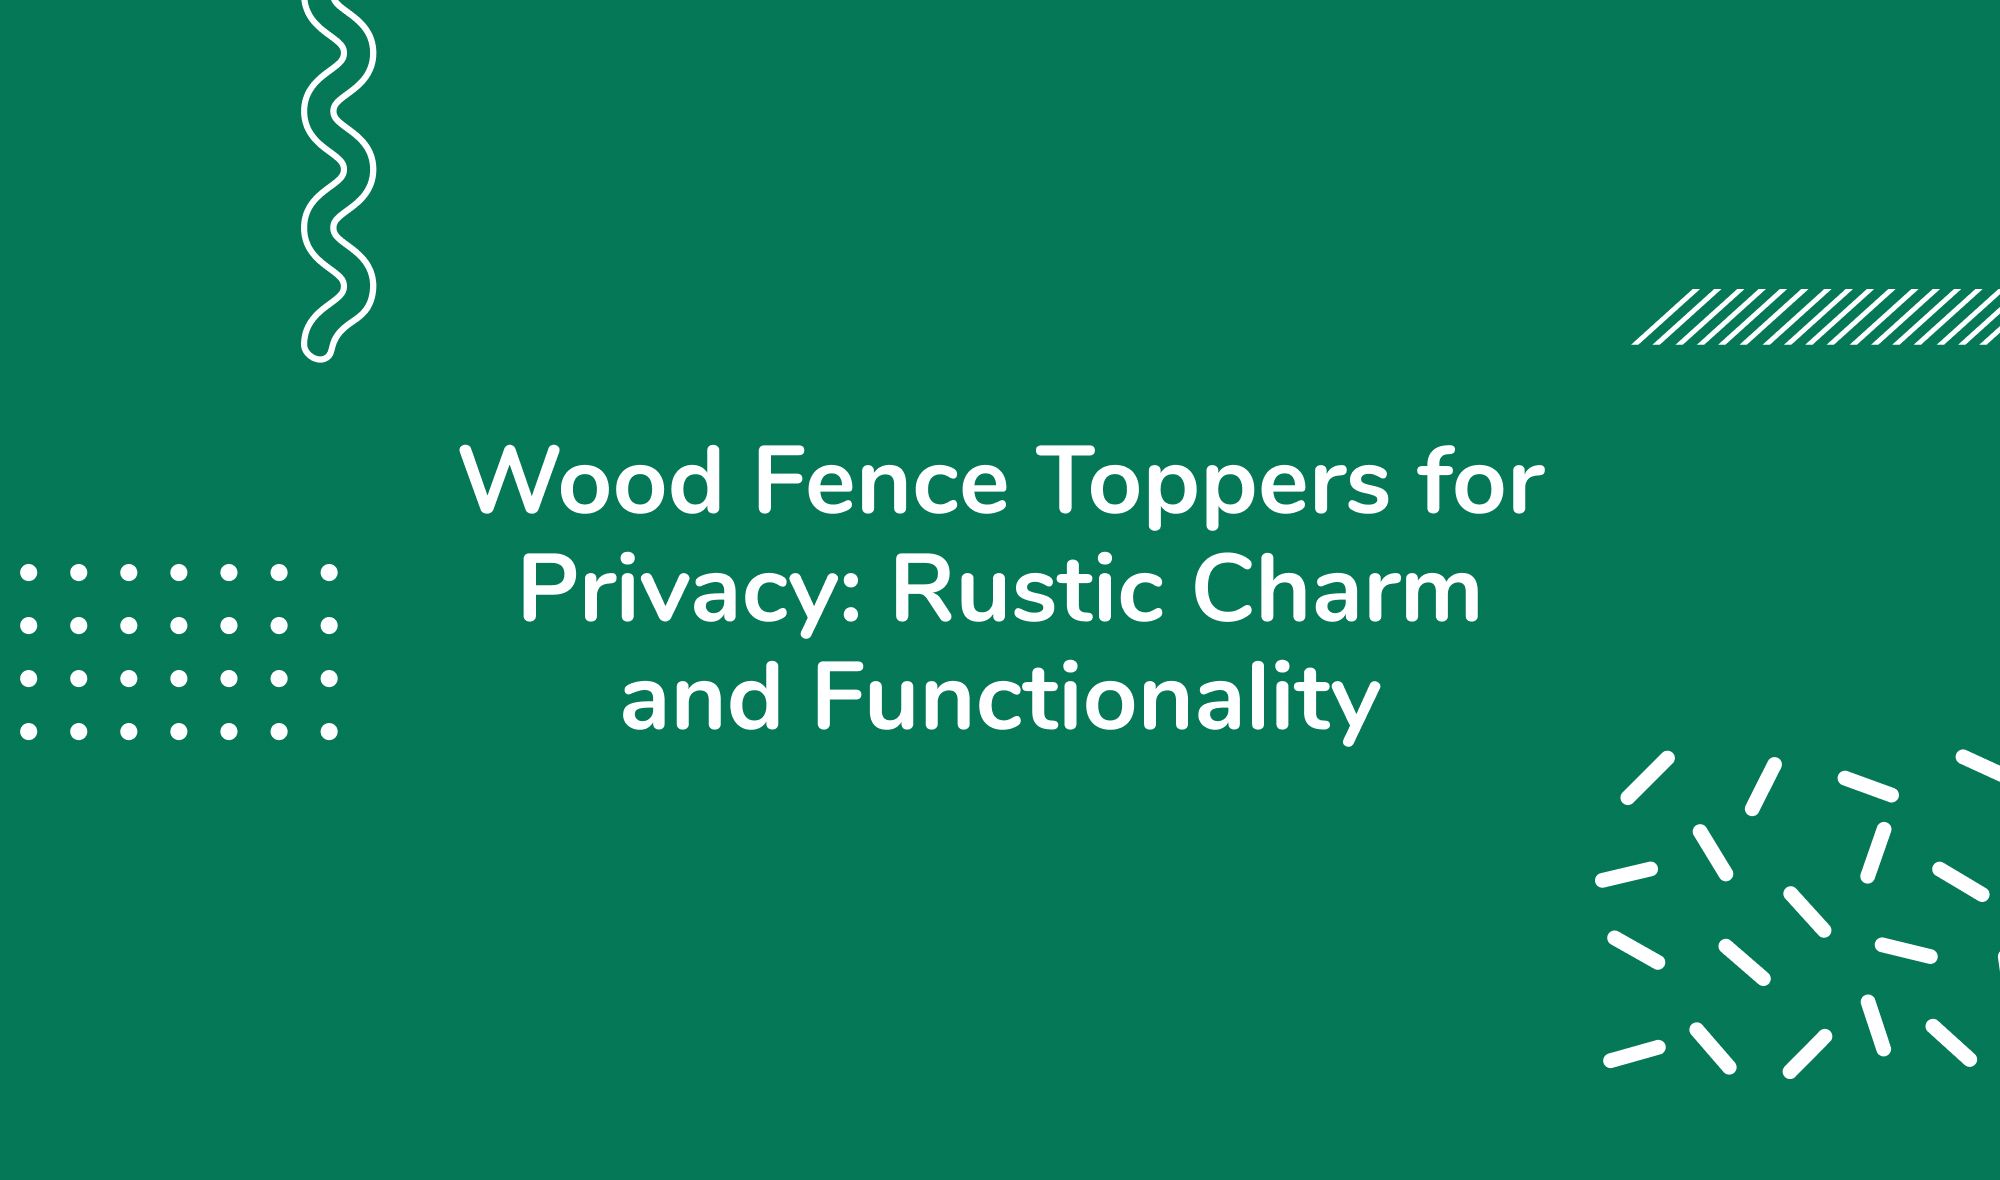 Wood Fence Toppers for Privacy: Rustic Charm and Functionality